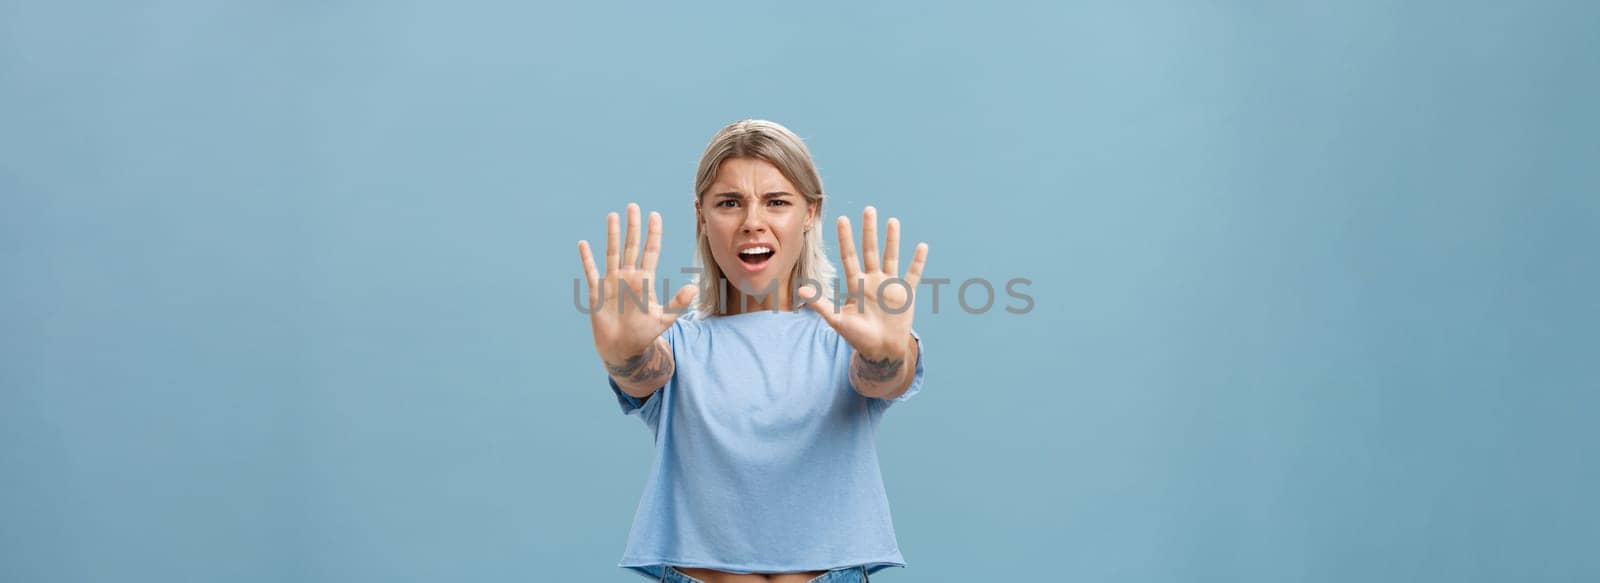 Hold right there. Portrait of intense displeased and irritated attractive young female in blue t-shirt pulling hands towards camera in stop or not gesture frowning and making annoyed expression.